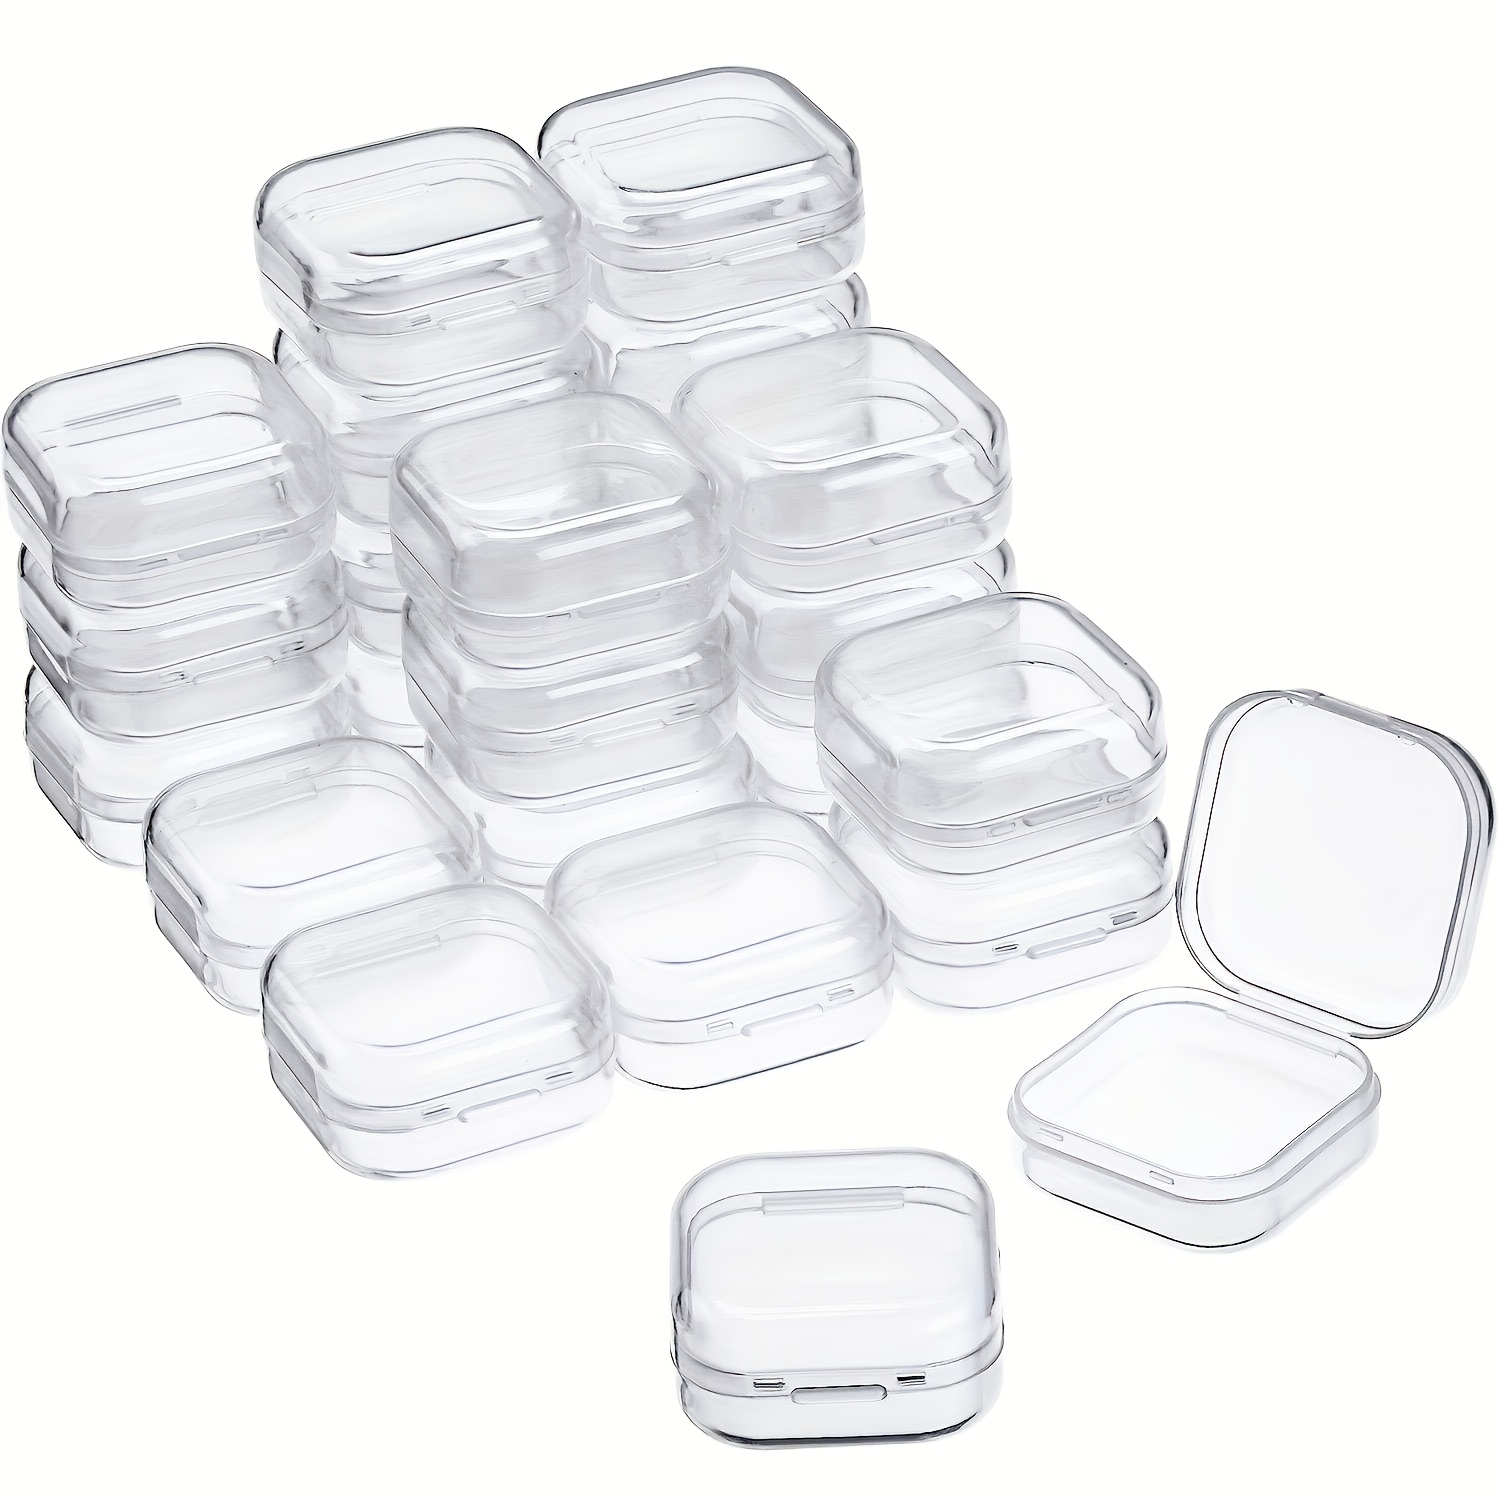 20pcs Plastic Transparent Round Storage Box, Slime Container With Lids,  Food Storage Containers With Lid (Only Empty Box) Art & Craft Supplies